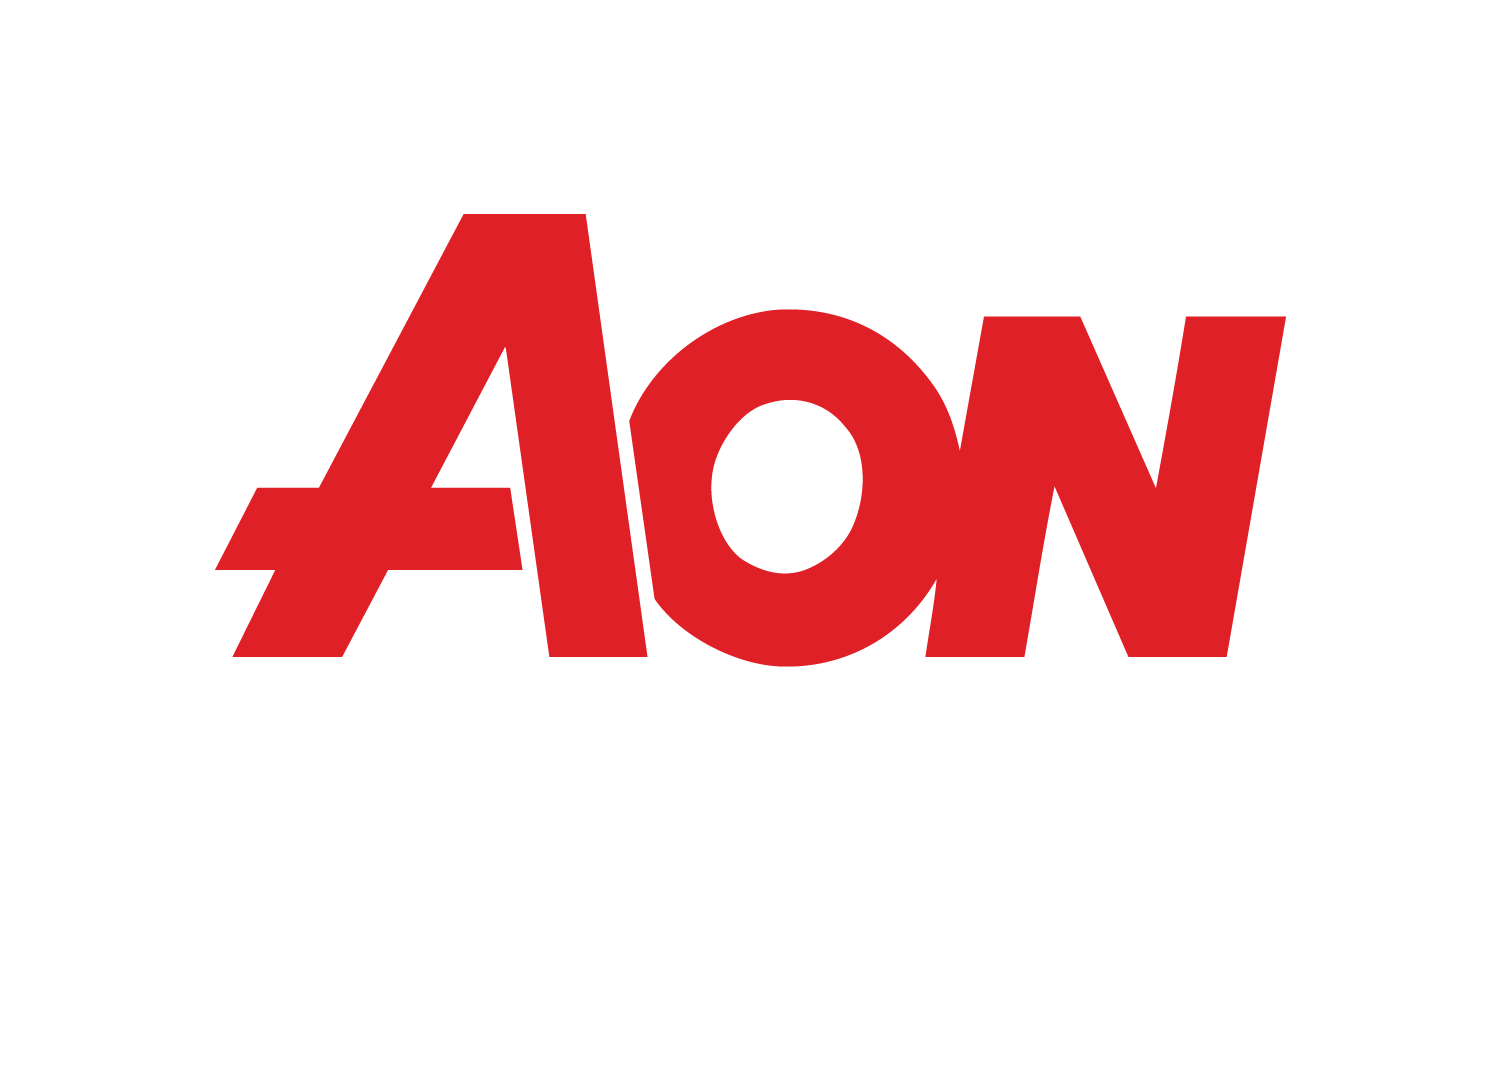 aon empower results